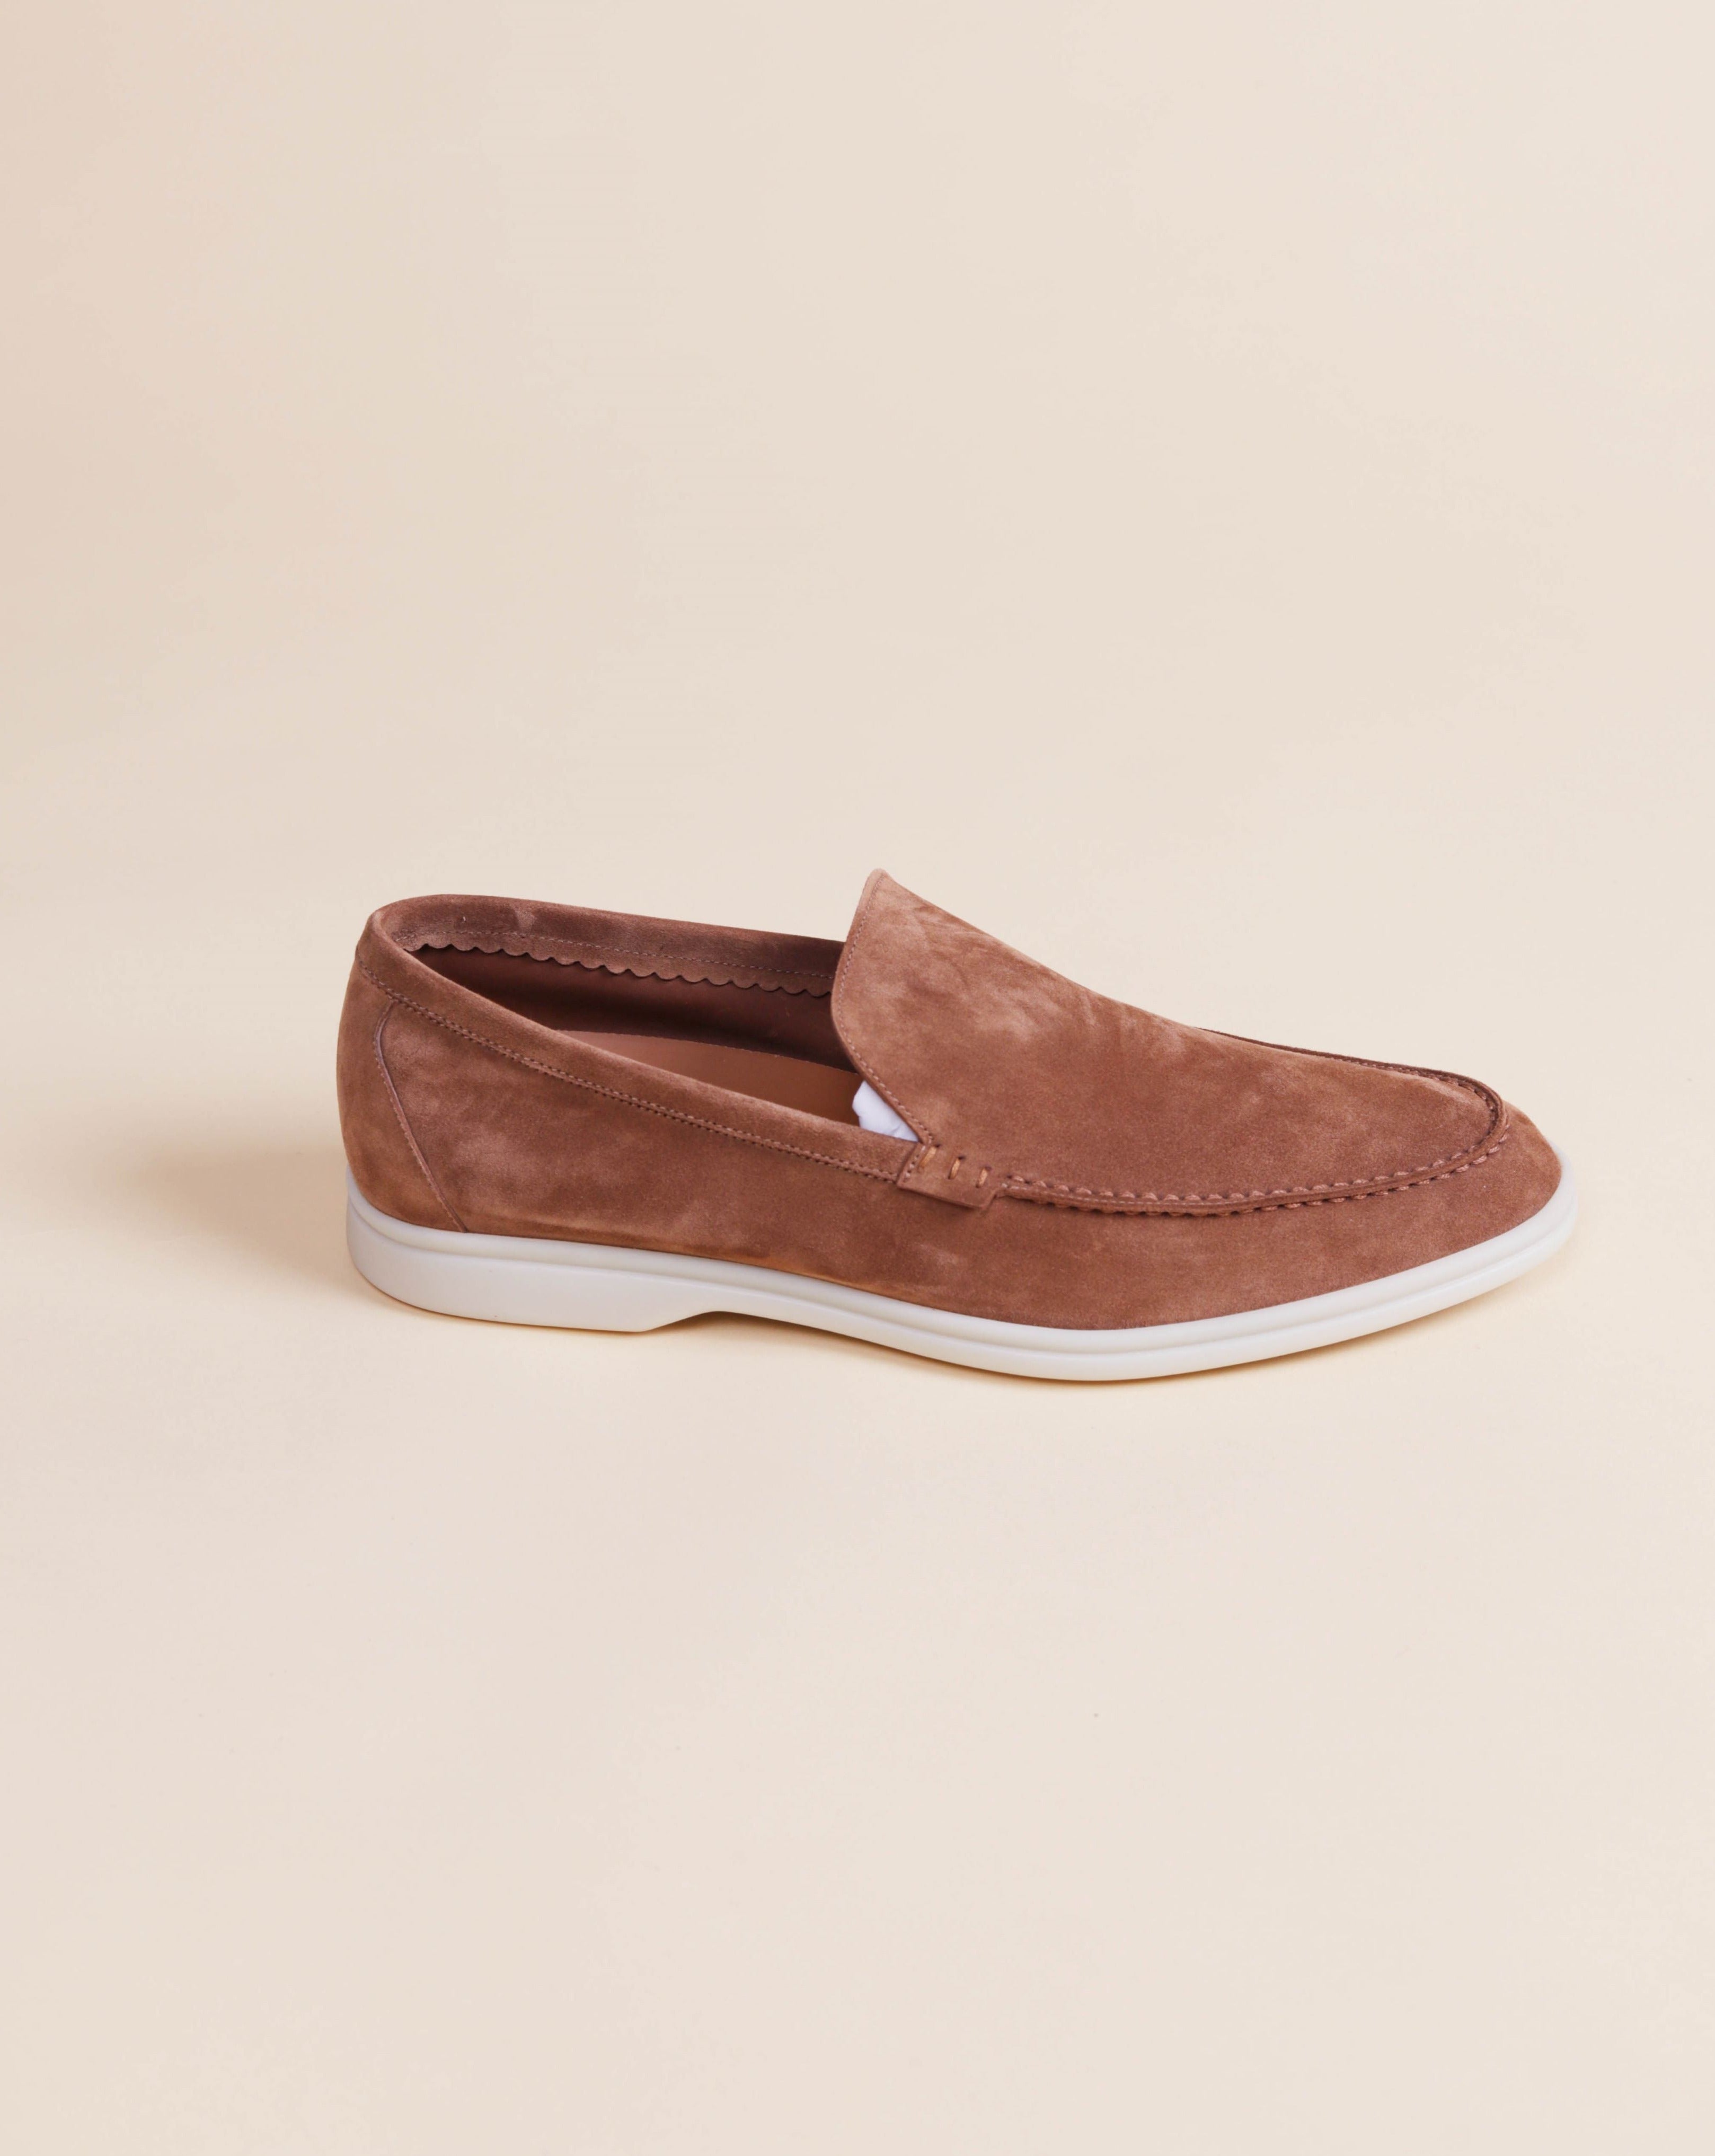 PS LOAFER SUEDE BROWN